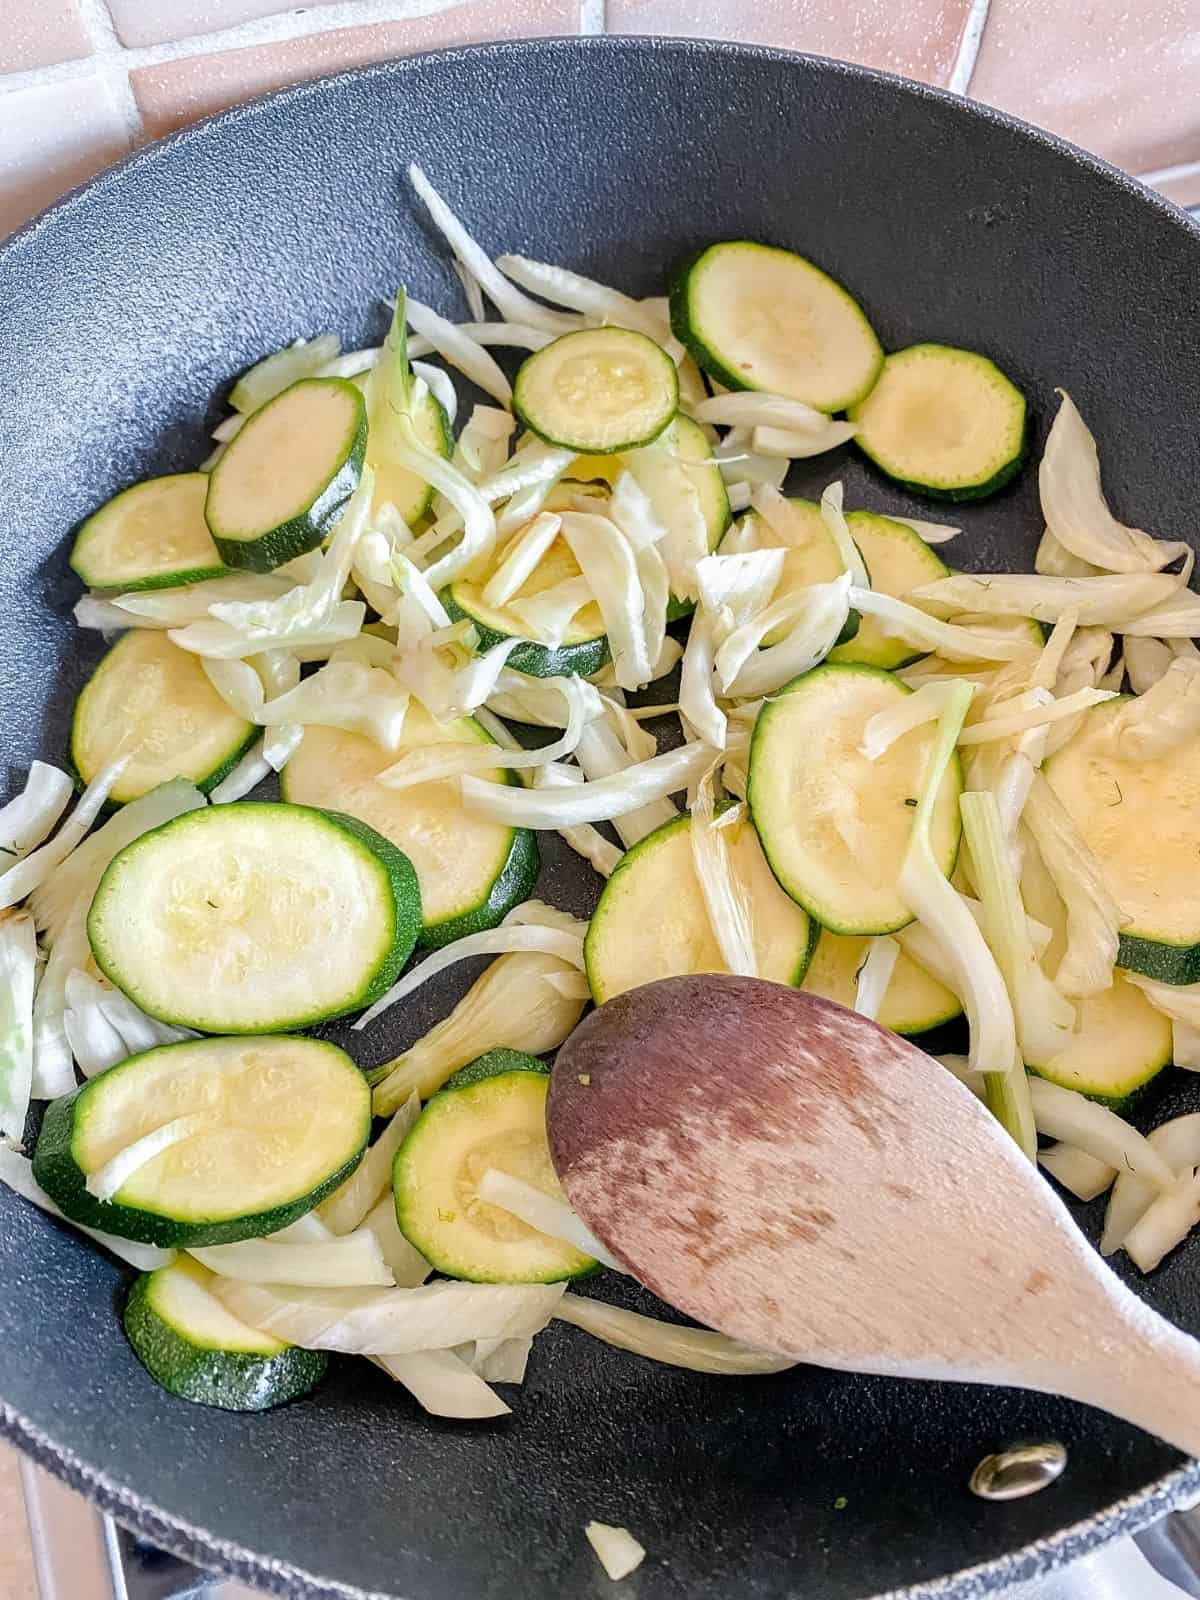 fennel and zucchini in a black skilelt being stirred with a wooden spoon.